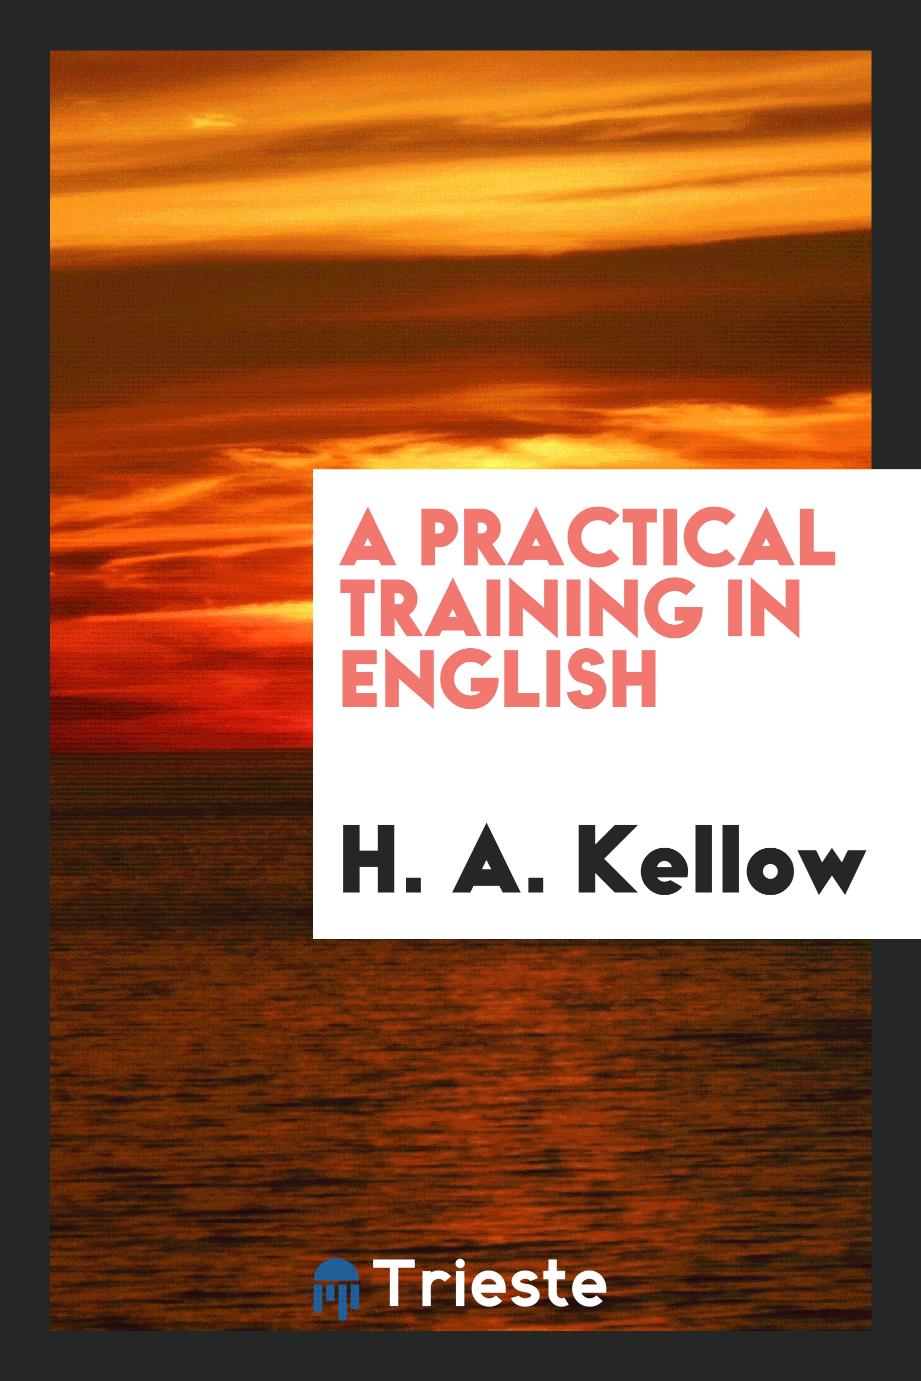 A practical training in English